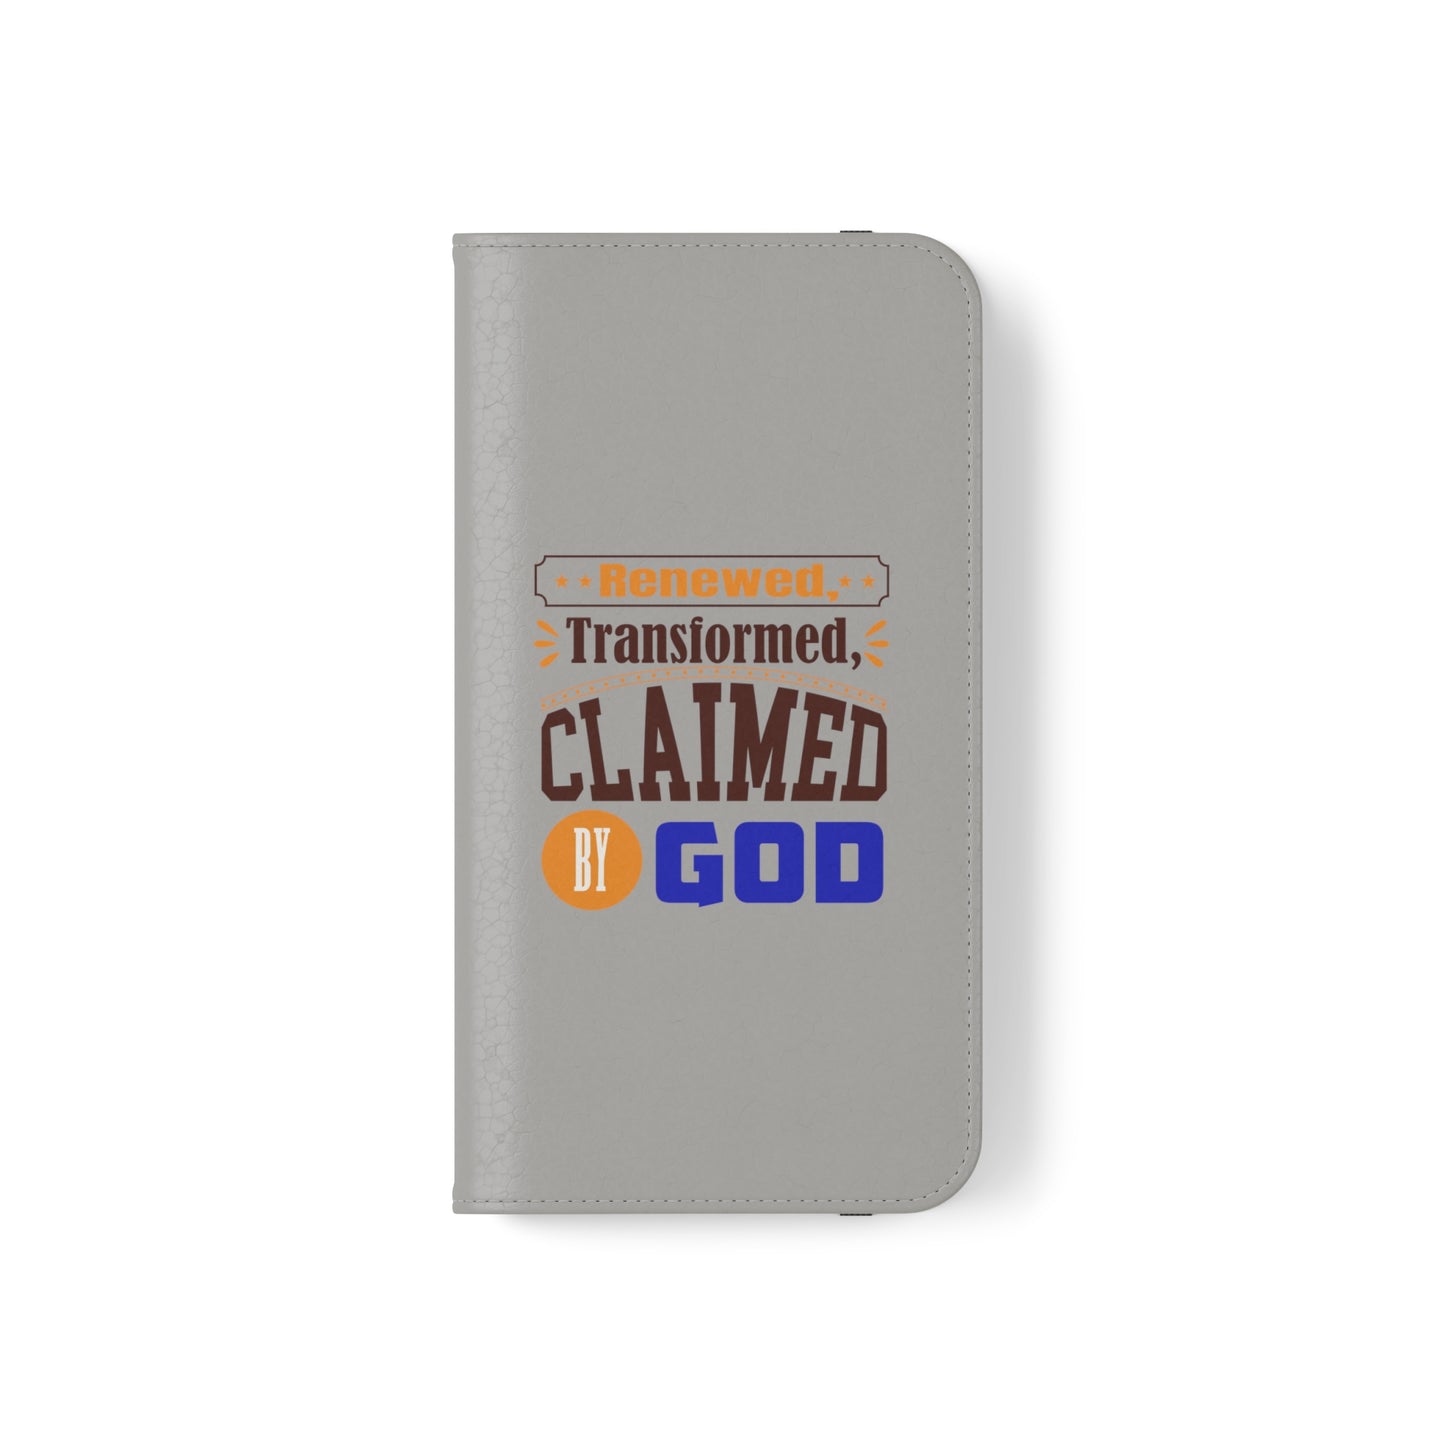 Renewed, Transformed, Claimed By God Phone Flip Cases